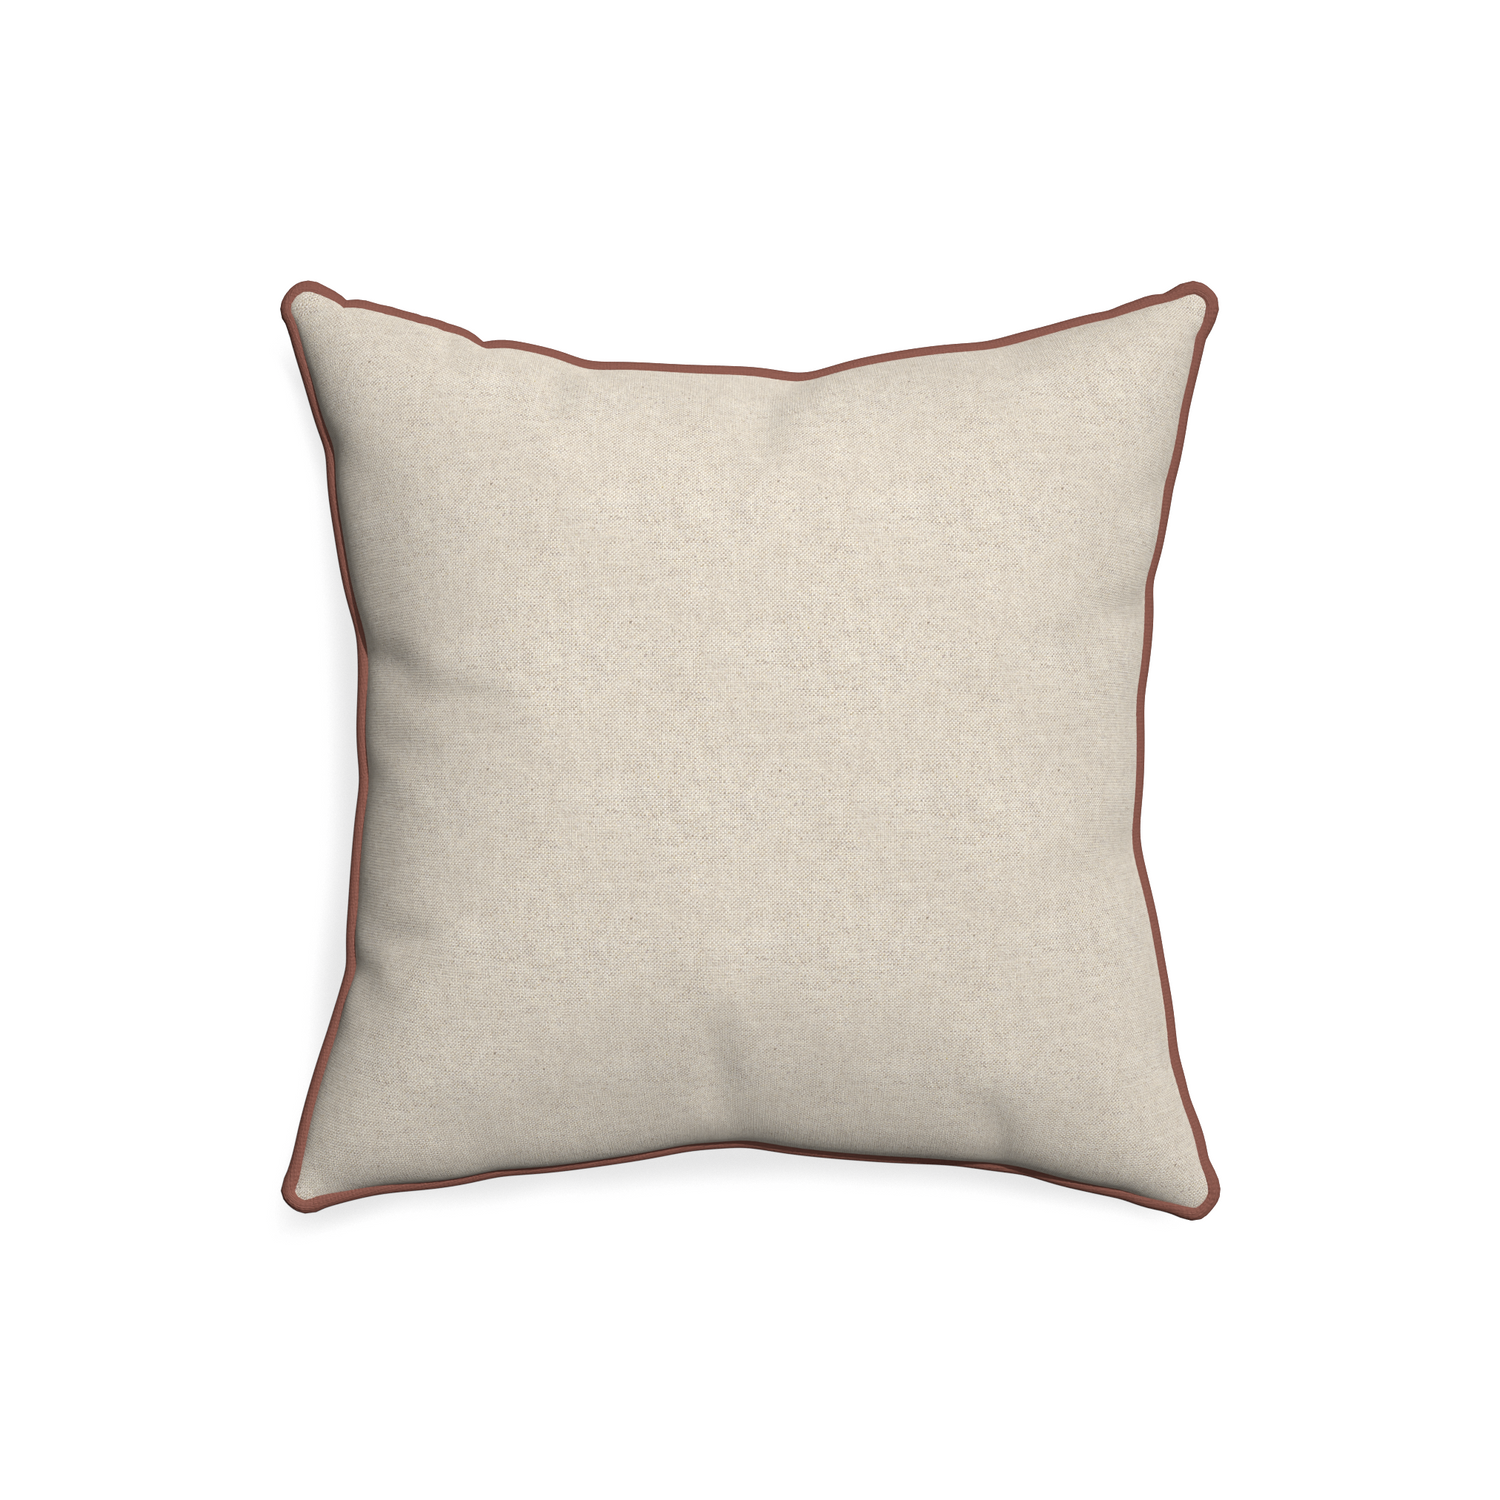 20-square oat custom light brownpillow with w piping on white background